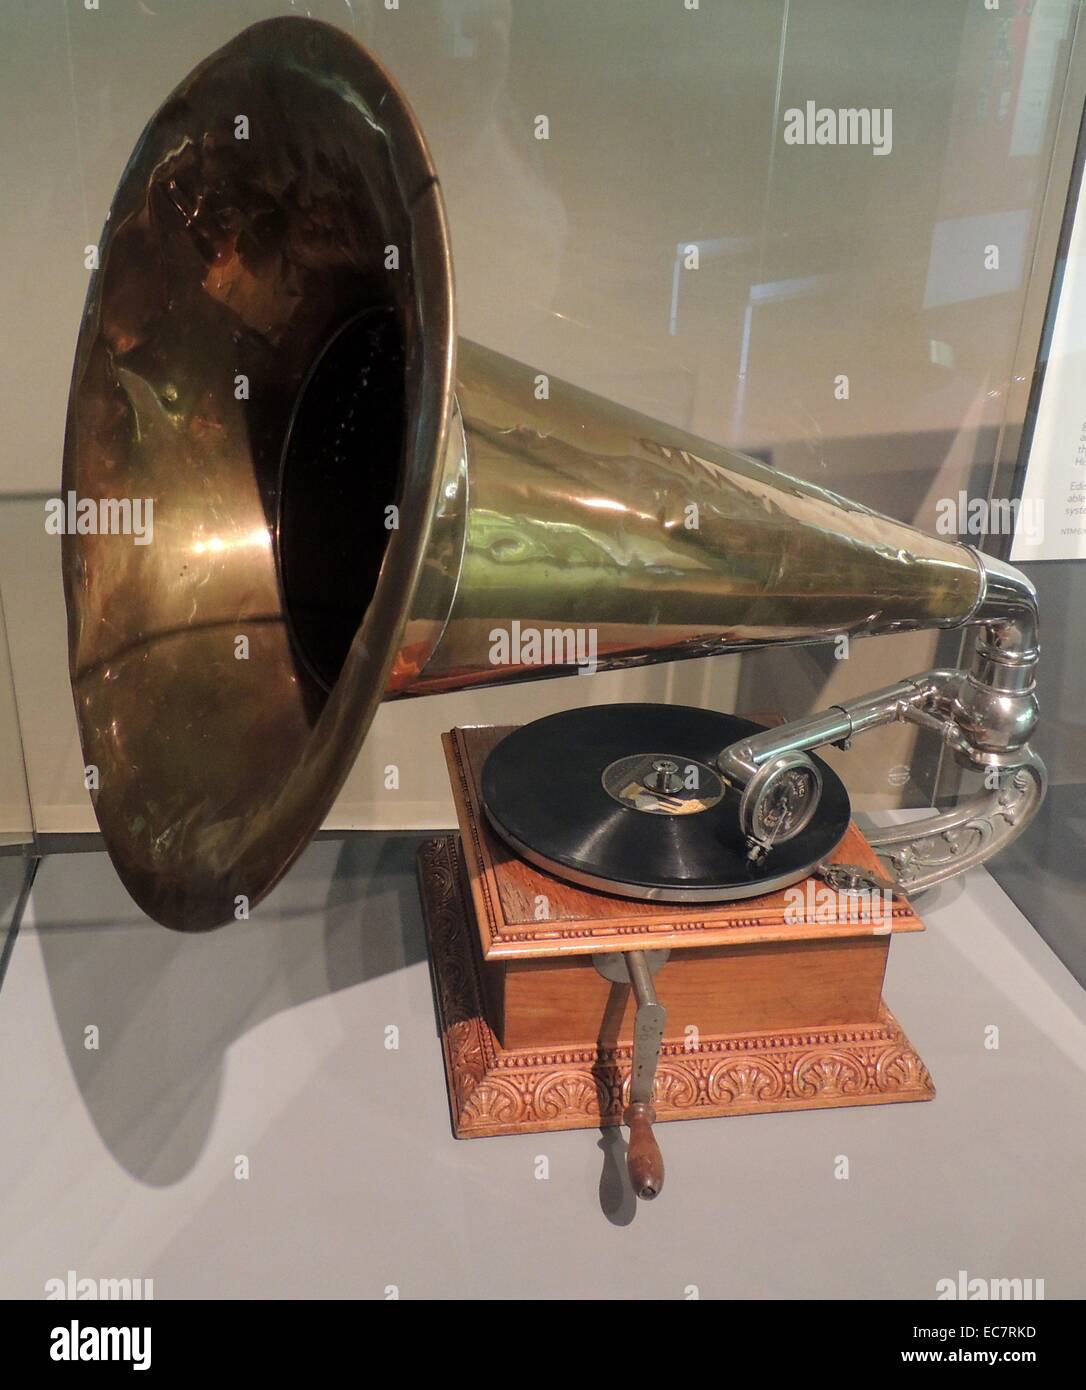 The Berliner Gramophone Used for Cinema Sound.  The gramophone was owned by the Norwegian film pioneer and cinema director, Hugo Hermansen.  Gramophones were used in the earliest cinemas to accompany silent films. Stock Photo